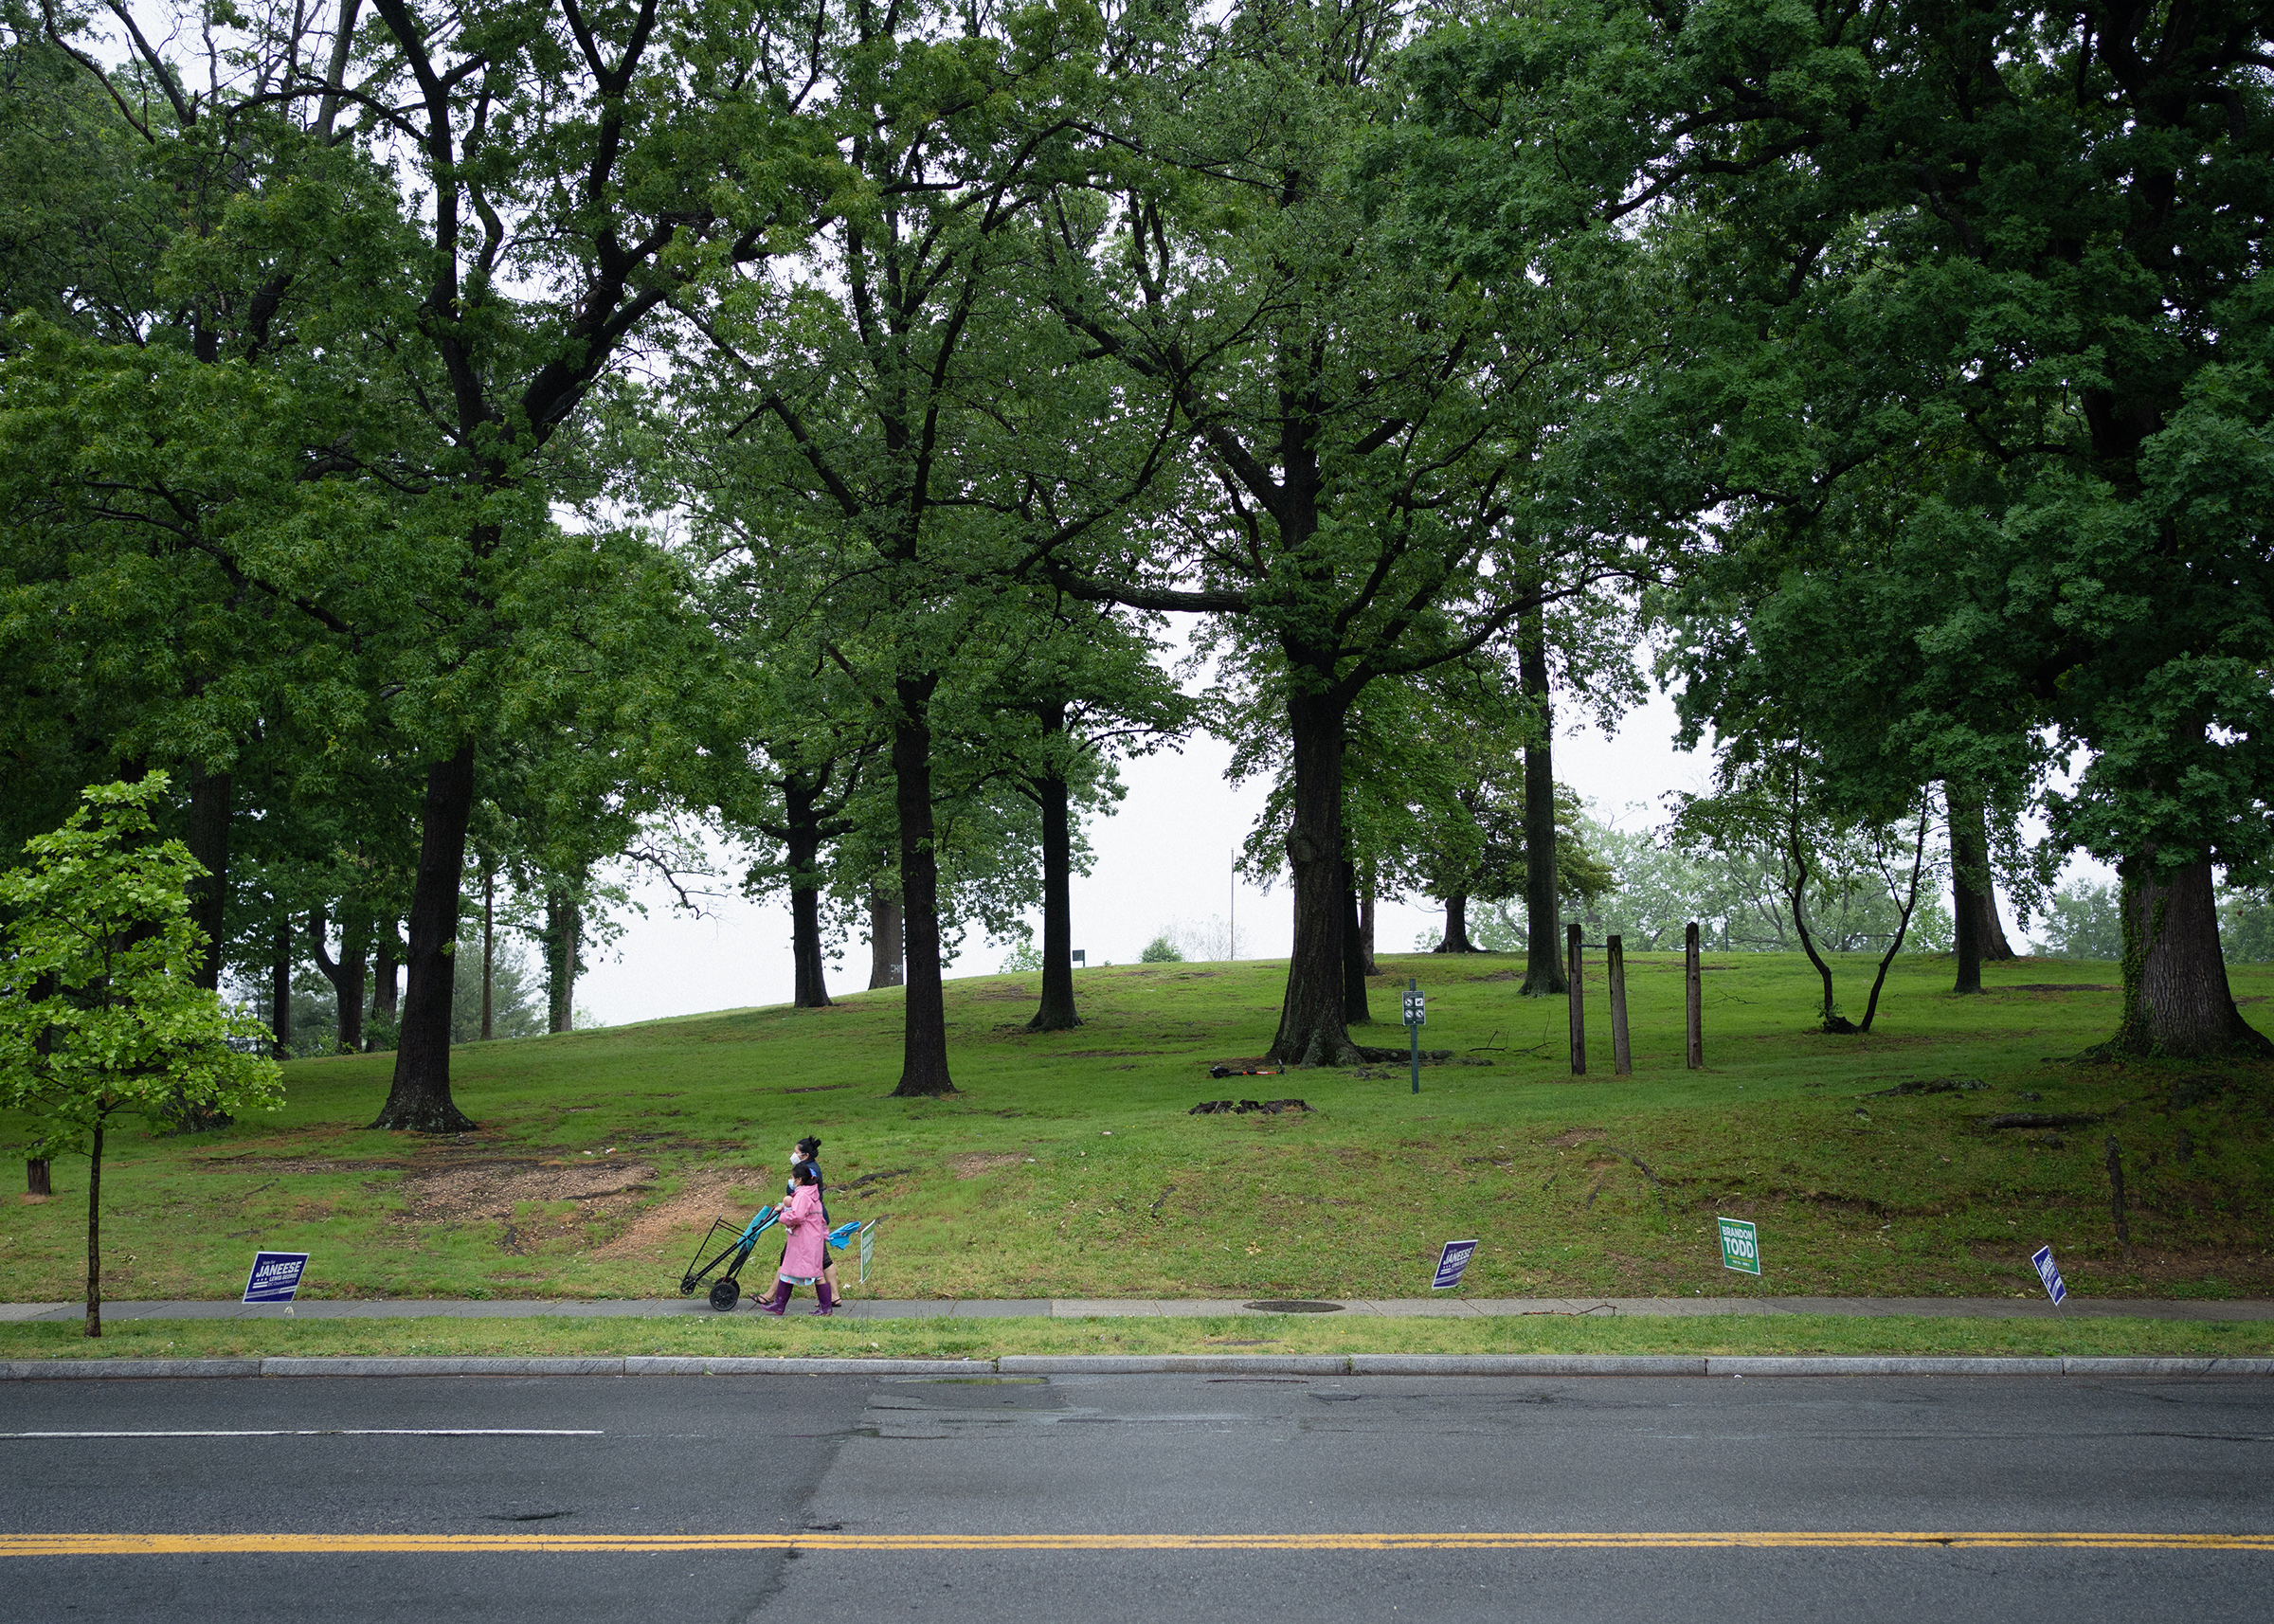 Emery Heights Park on a cloudy day in Washington, D.C., on May 22. (Nate Palmer for TIME)